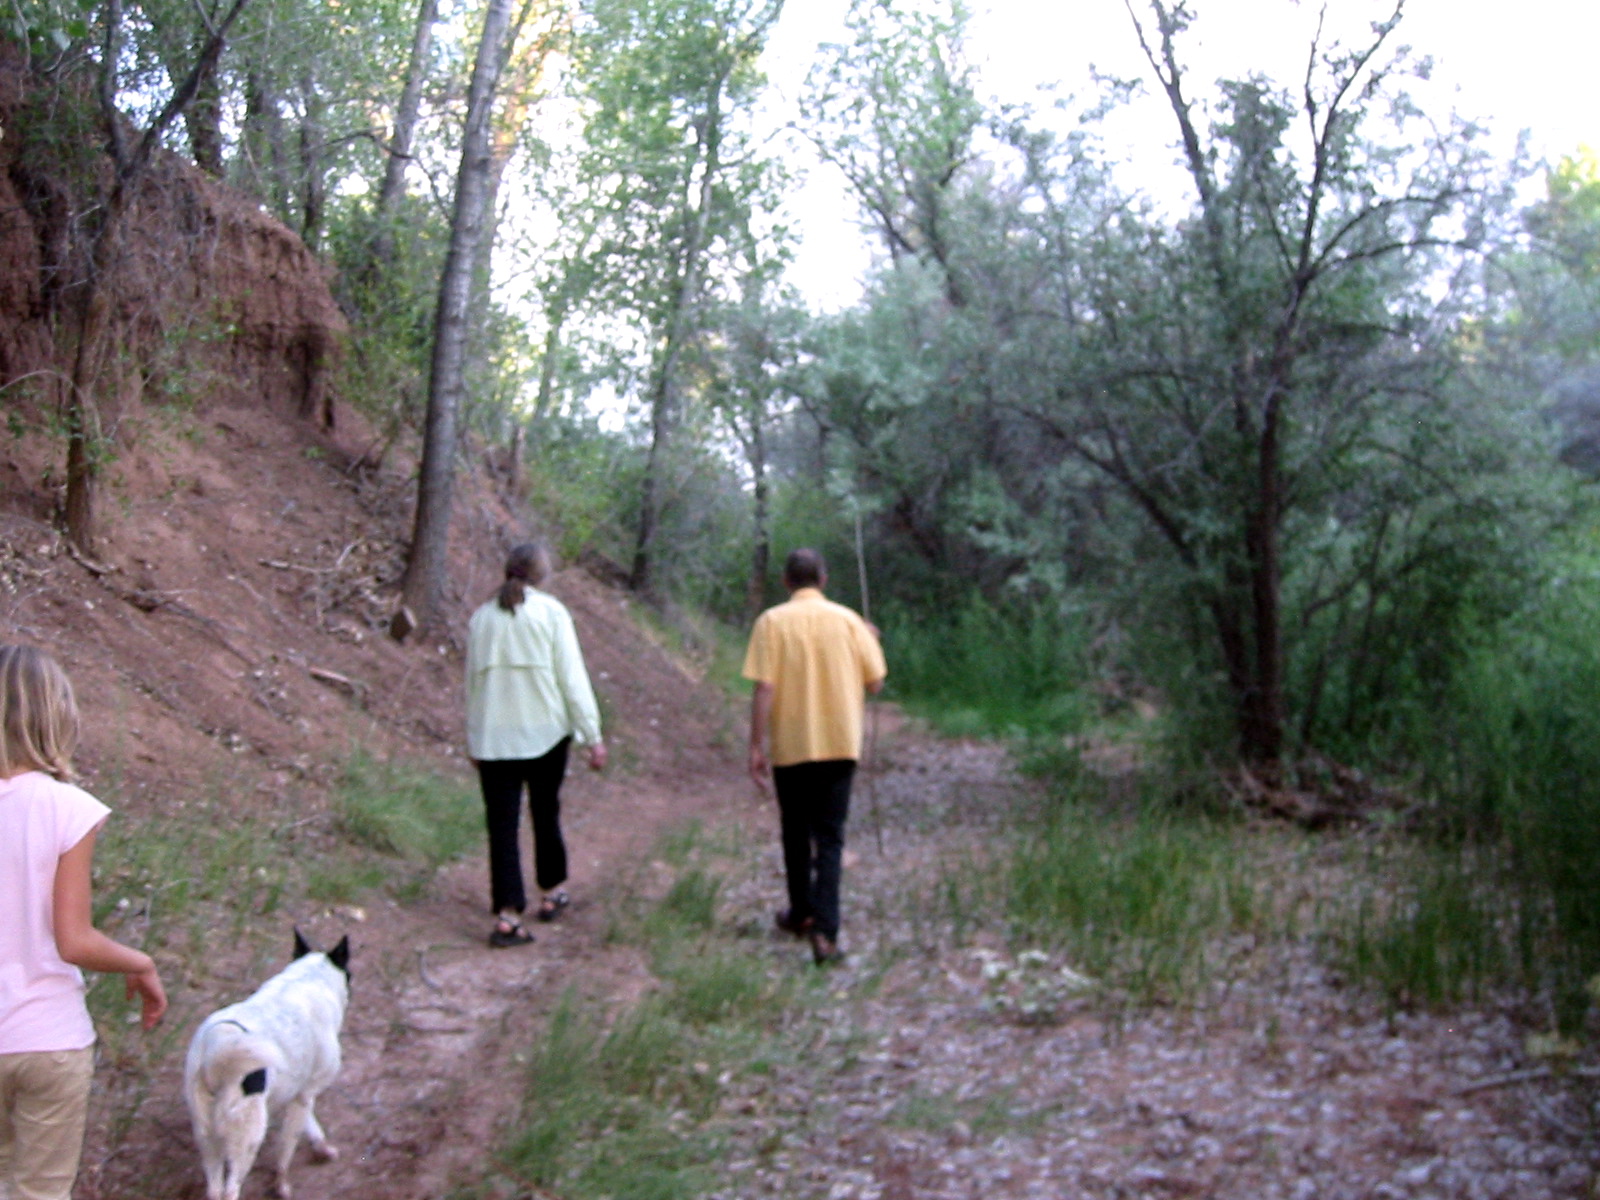 Walking in the Galisteo bosque